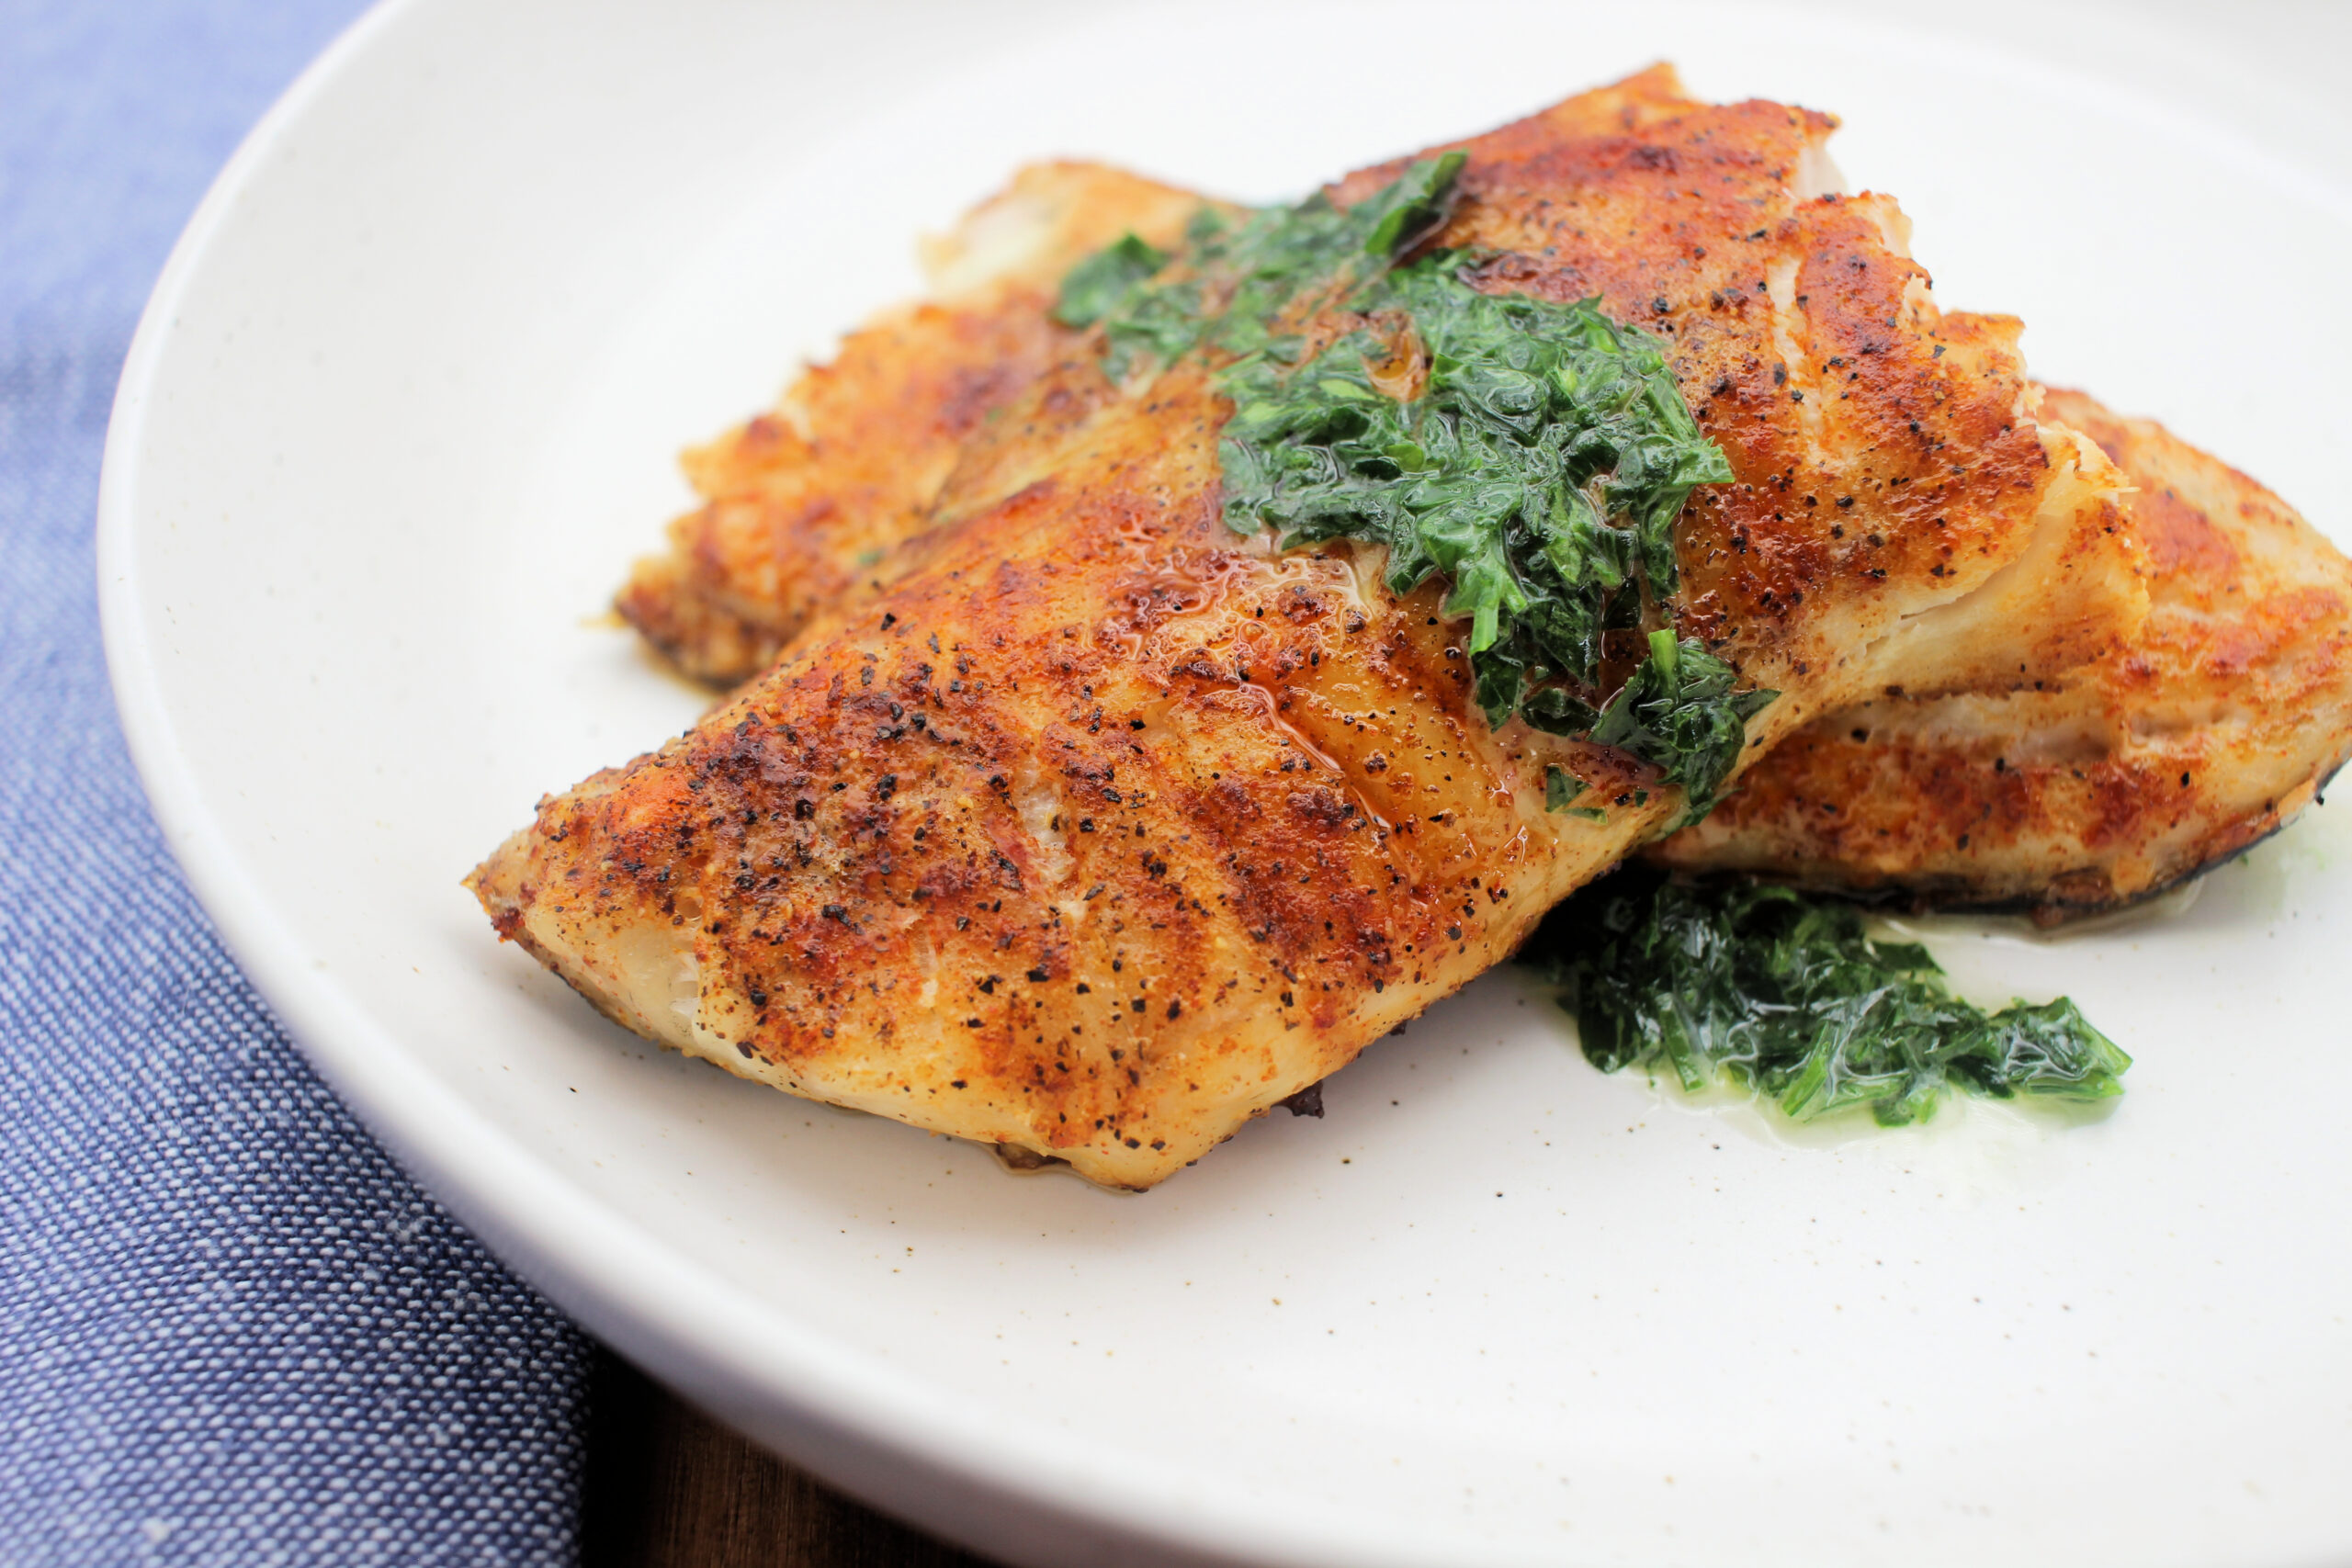 image: Baked Spotted Trout with Parsley Butter.